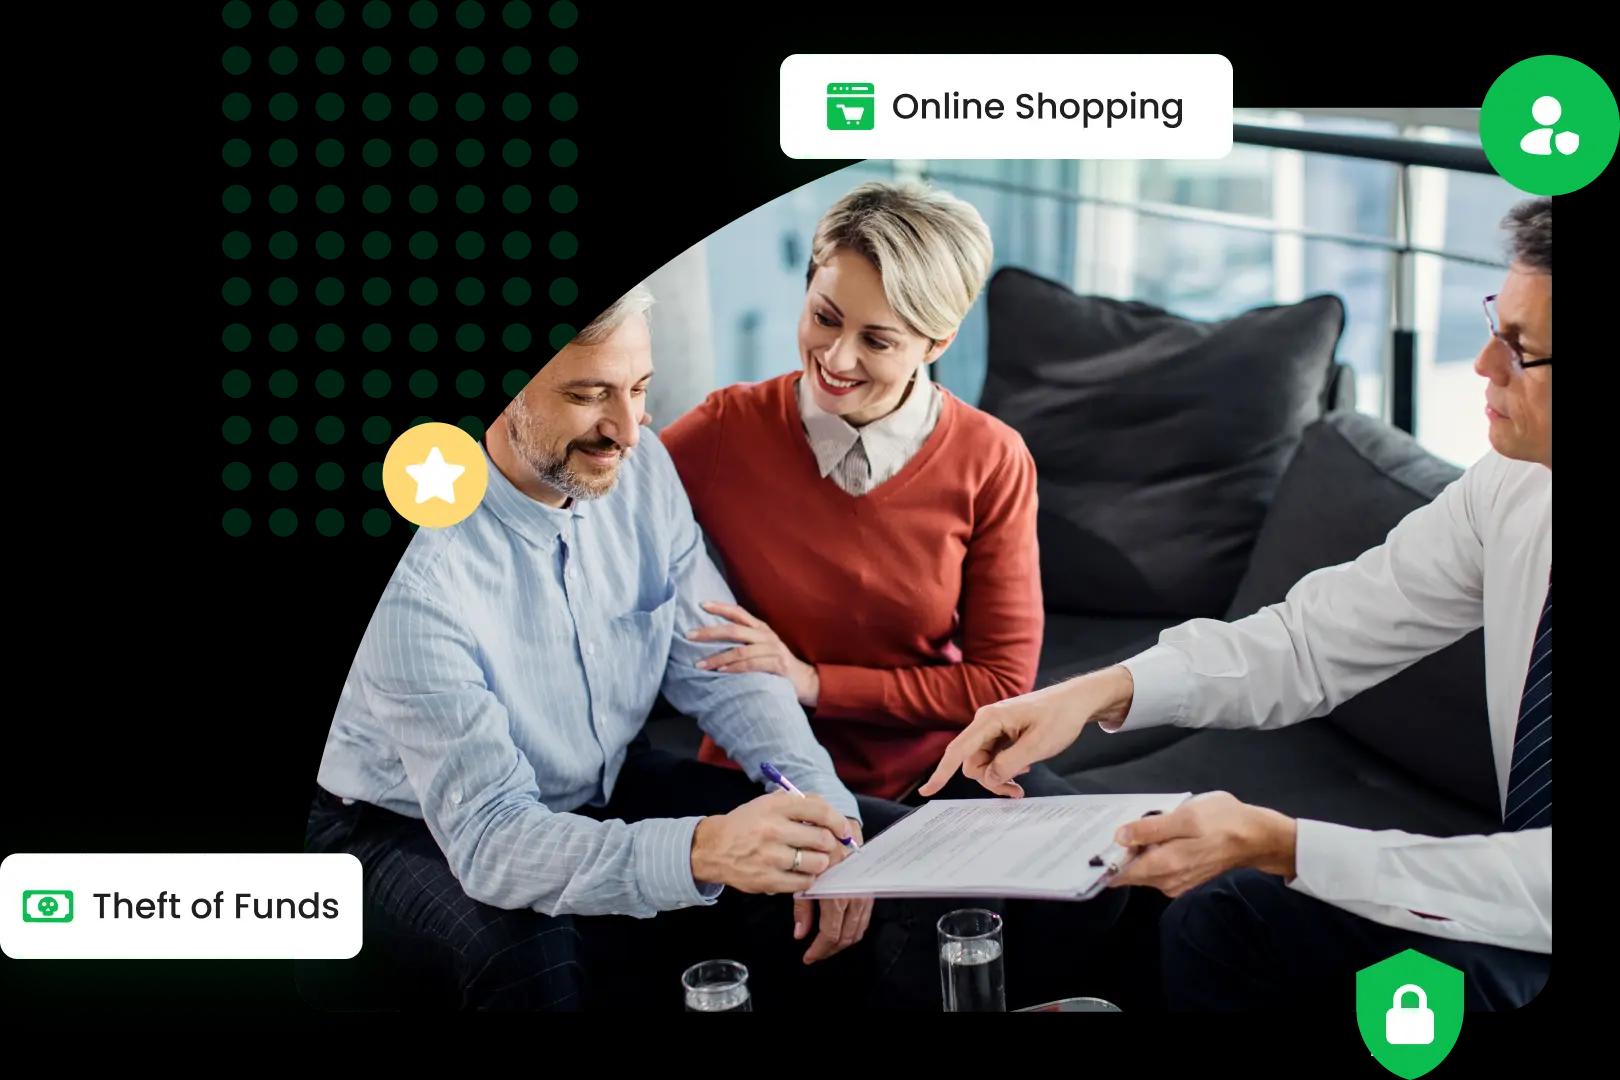 An image of a group seated on a couch, reviewing documents with an insurance advisor. Icons represent online shopping and theft of funds, suggesting topics related to personal cyber insurance coverage.